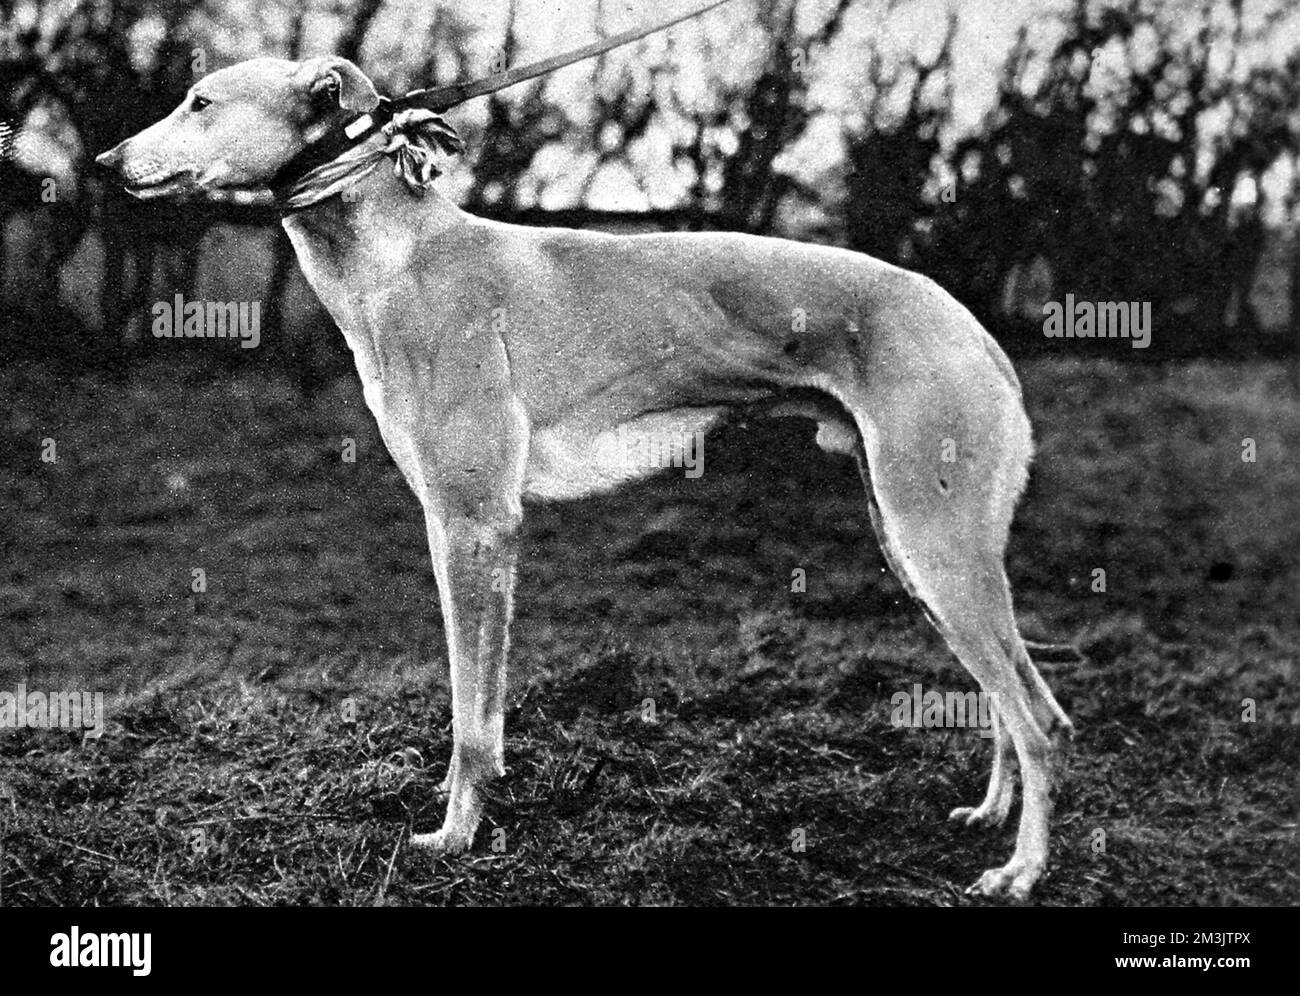 Photograph of the greyhound 'Jovial Judge', owned by Mr. J.L. Jarvis and trained by Mr. Denny Smith; the Winner of the 1926 Waterloo Cup.  'Jovial Judge' beat 'Running Rein' by two lengths over the deciding course, on the 19th February.     Date: 1926 Stock Photo